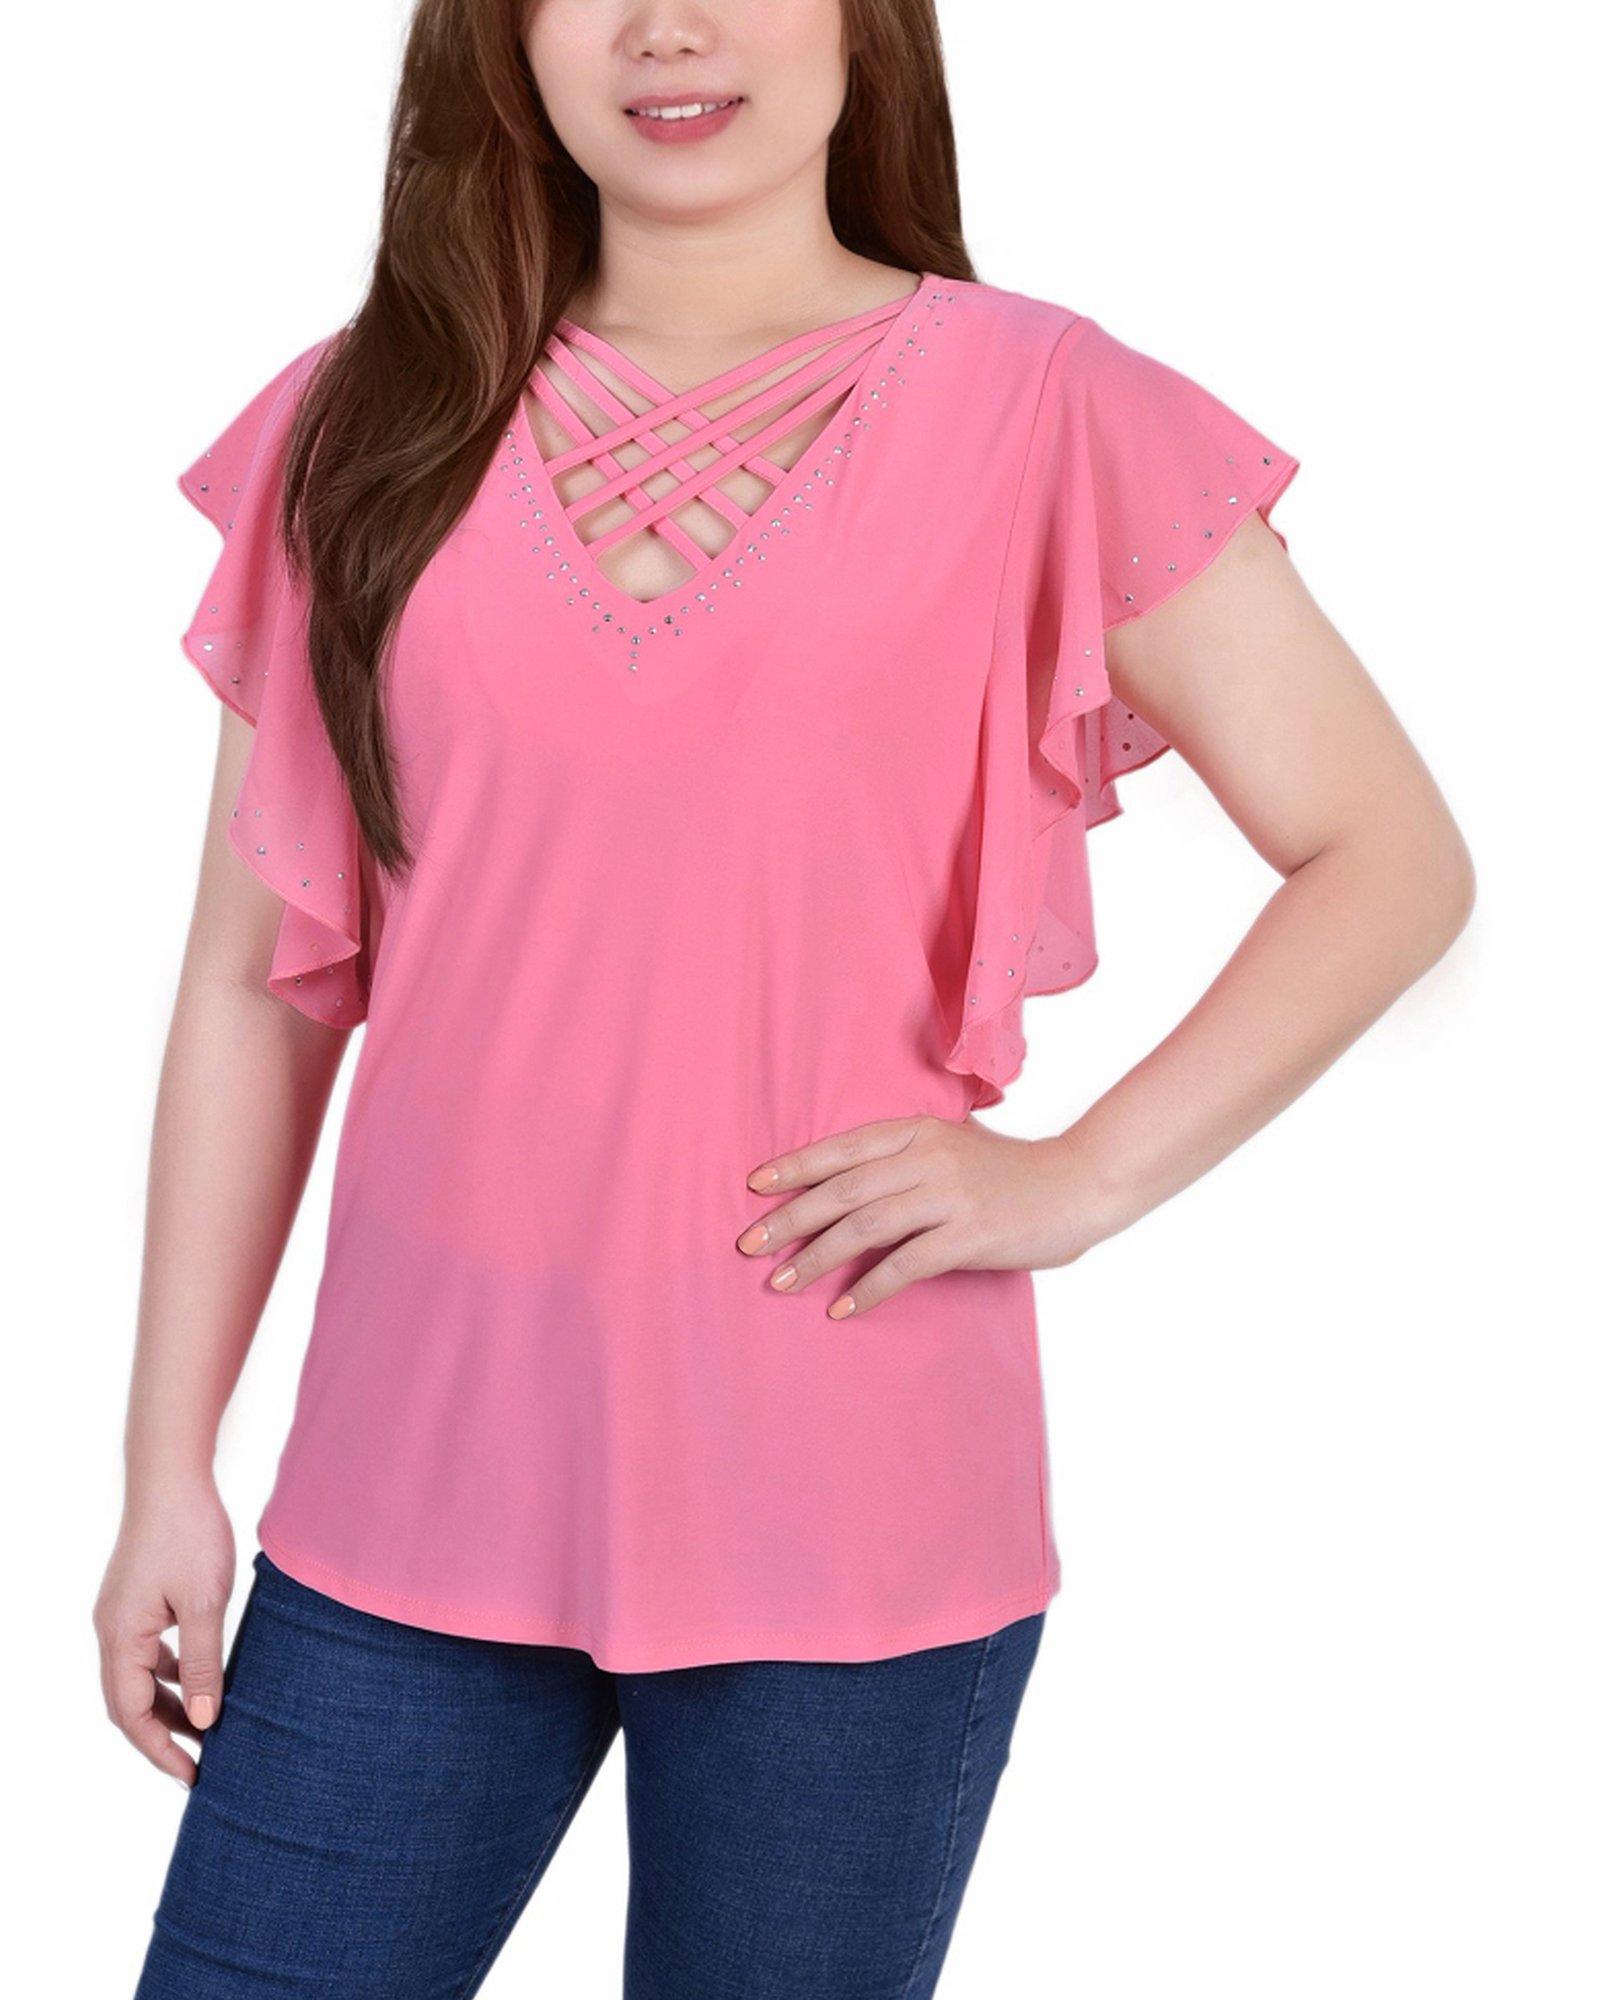 NY Collection Womens Flutter Sleeve Criss Cross Top